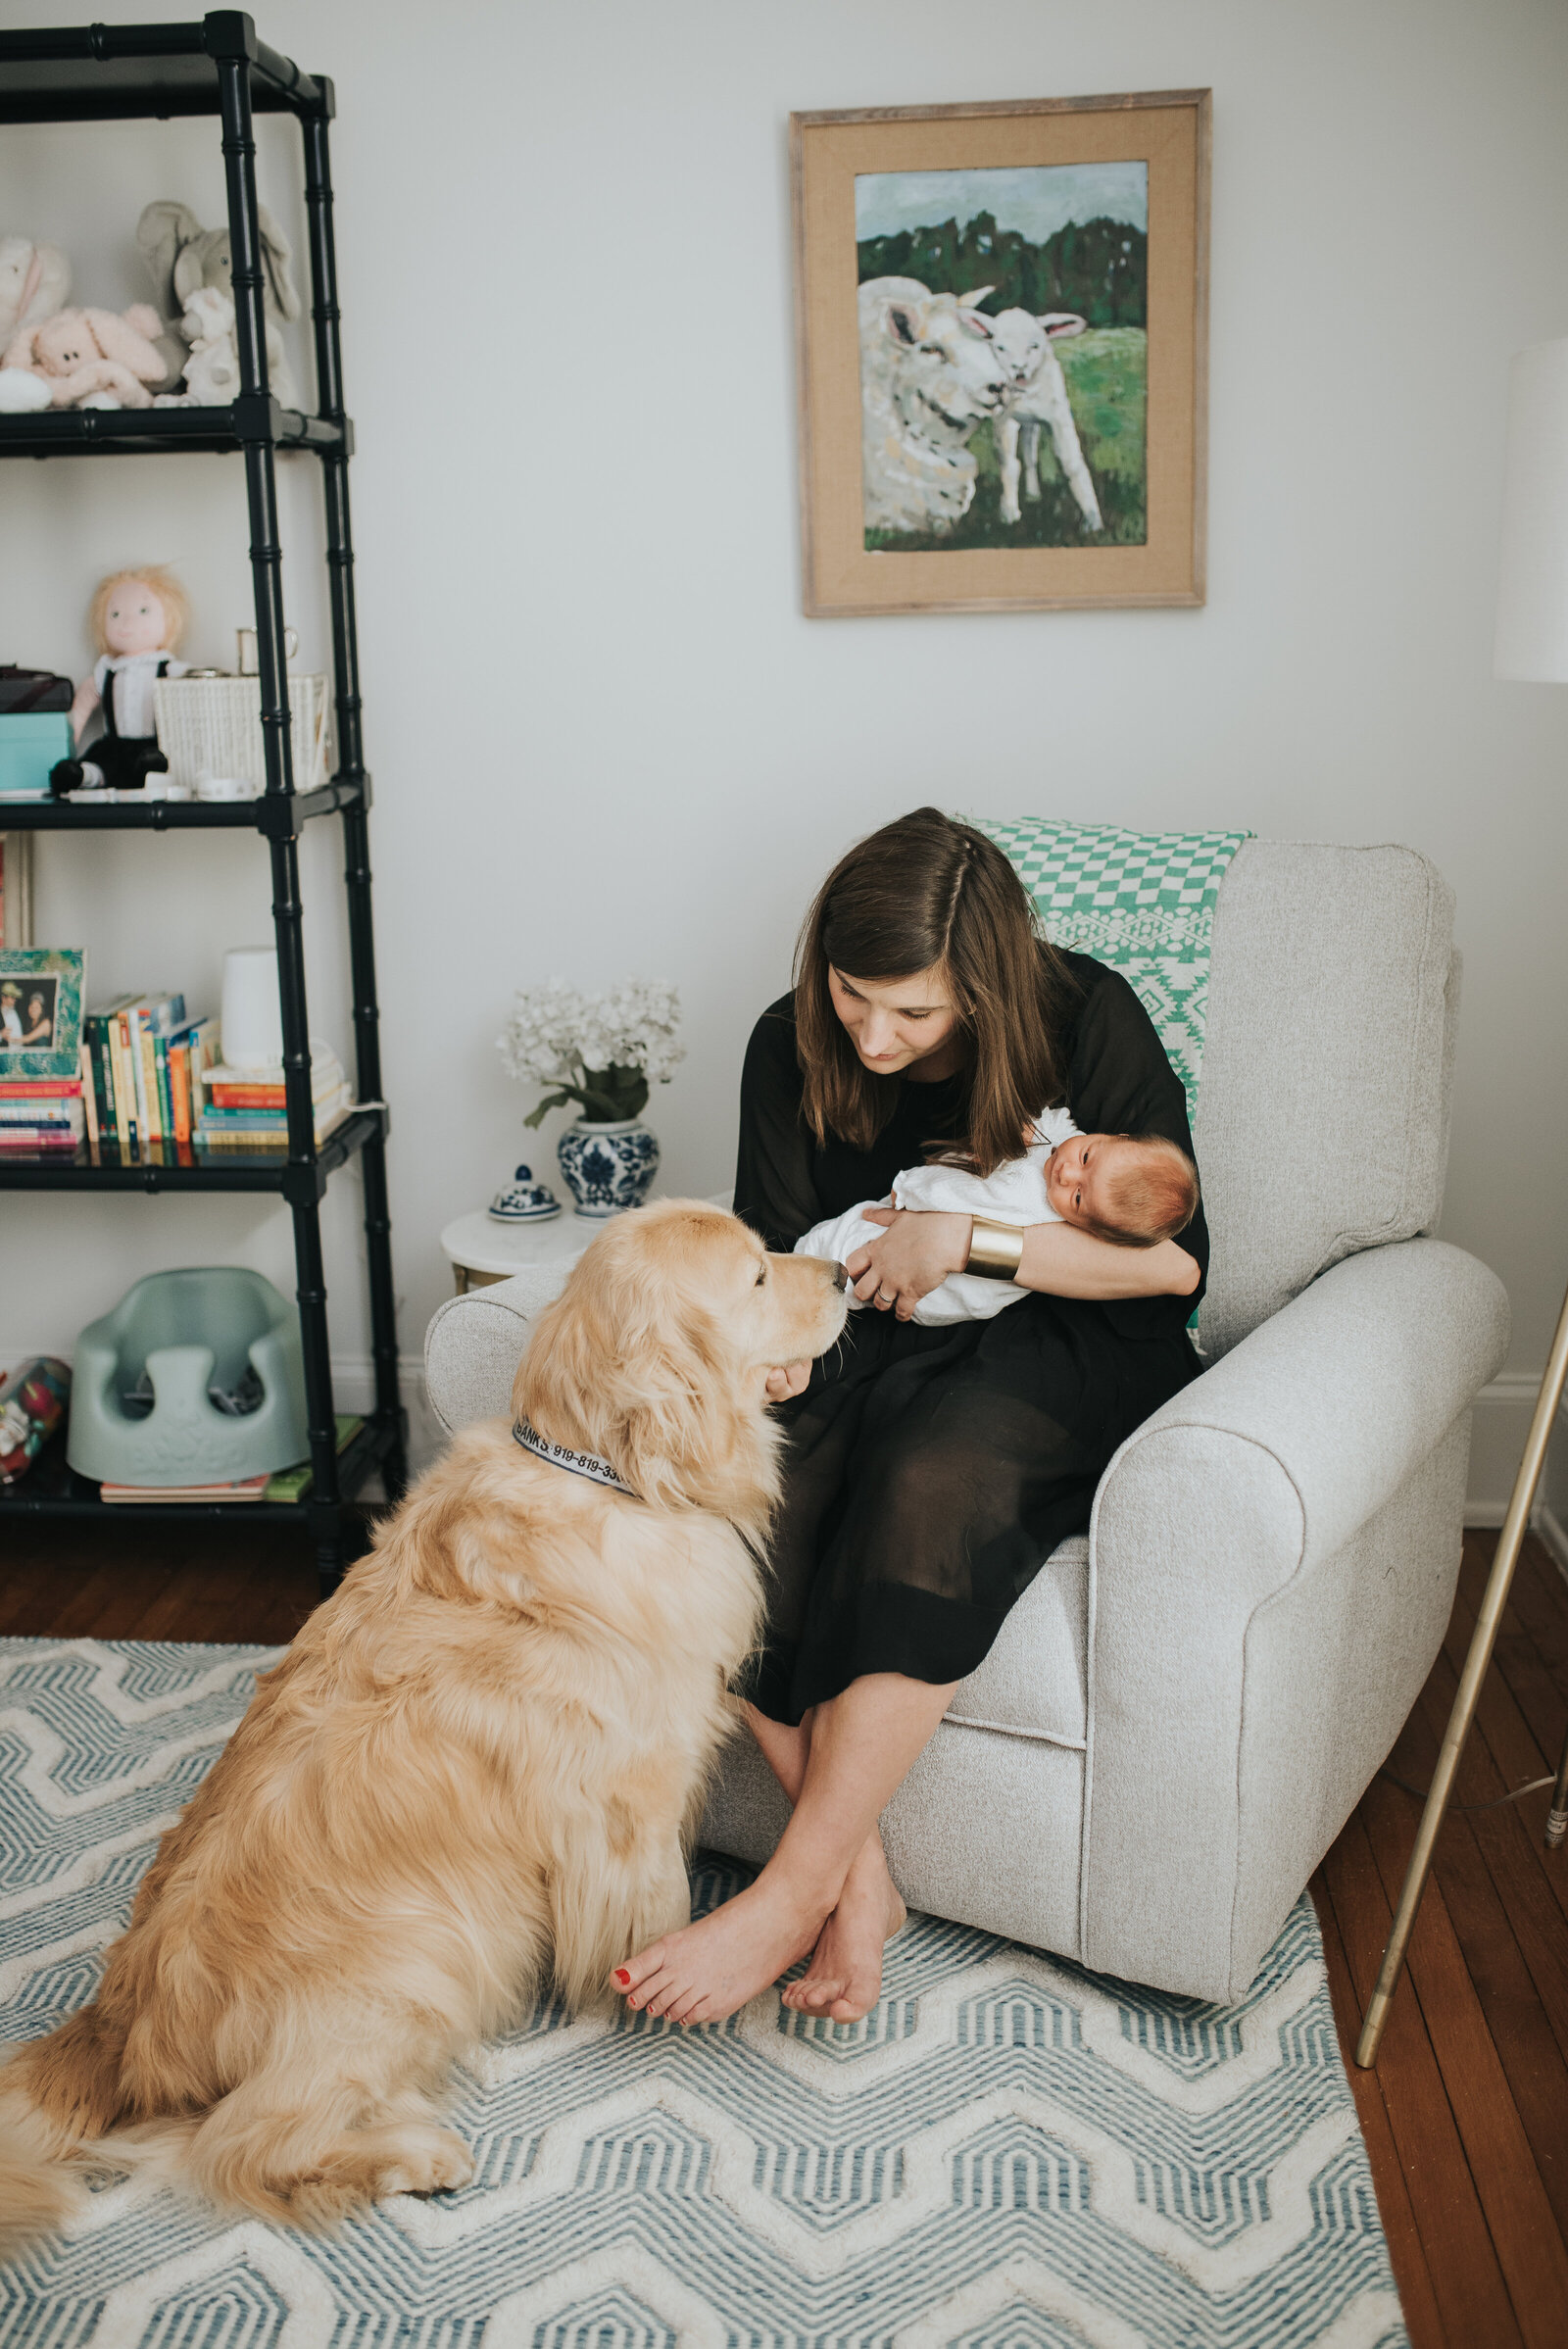 New mom holds baby girl during newborn session while golden retriever sniffs the baby